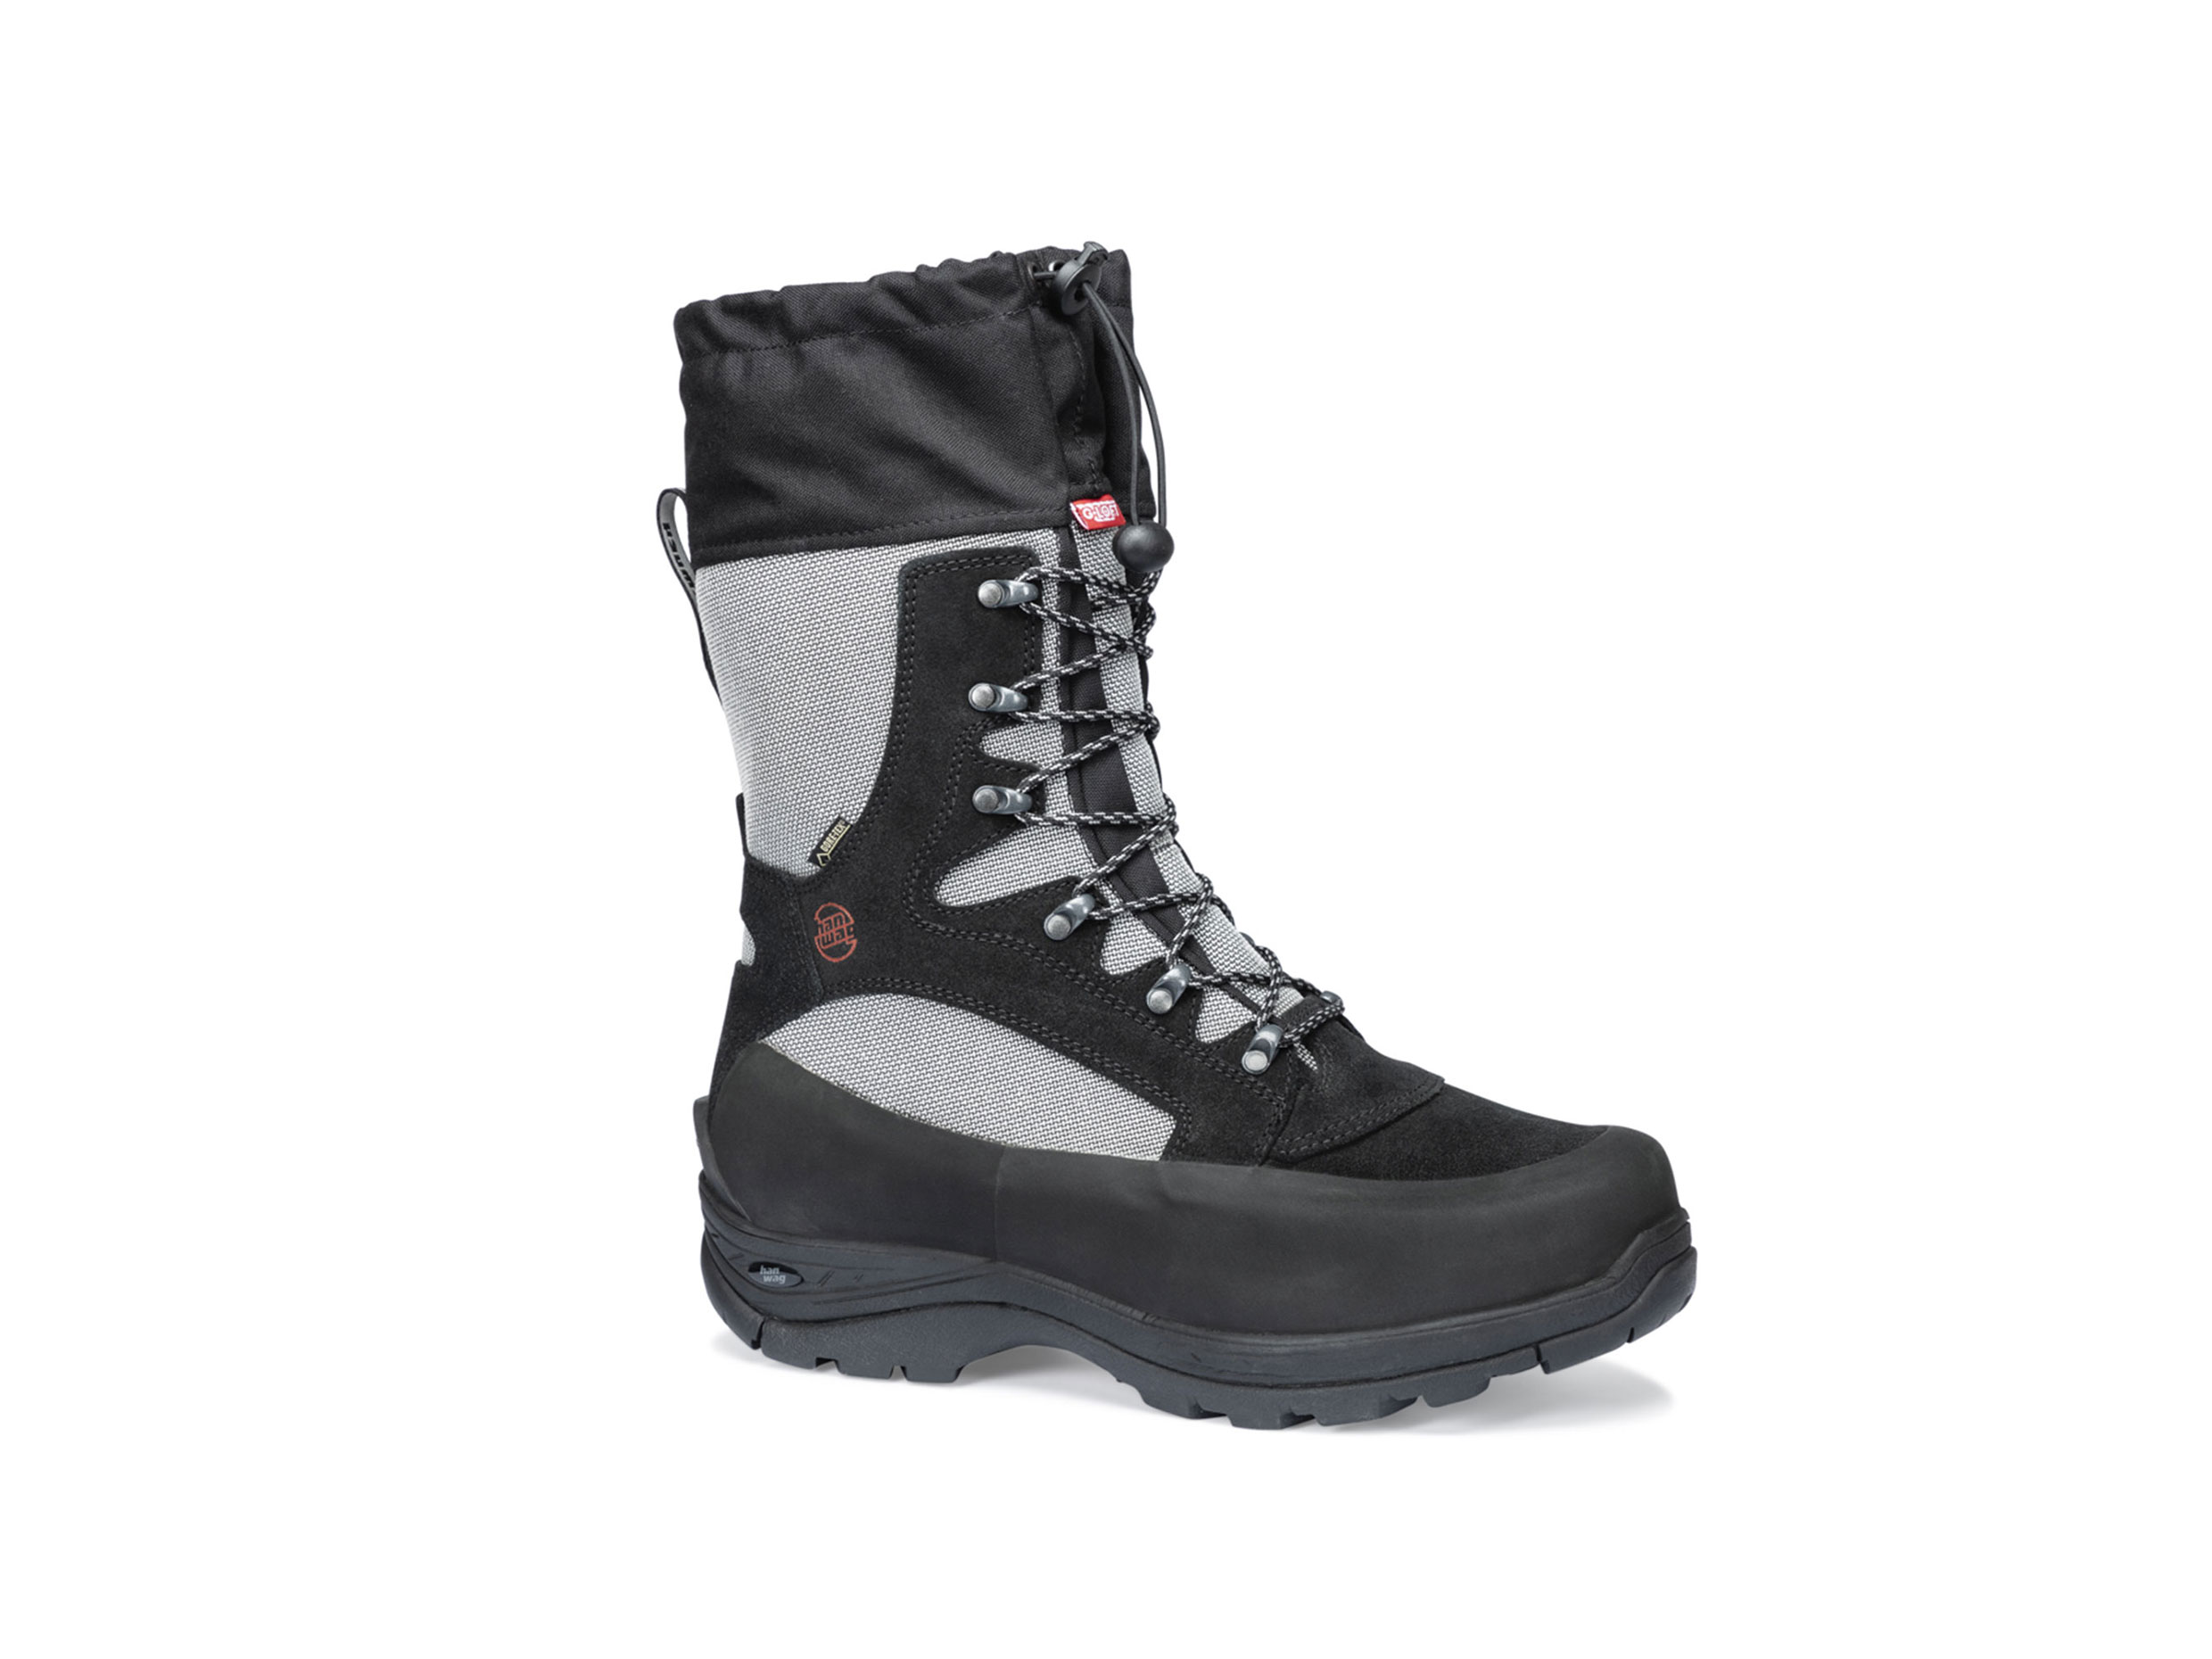 The Hanwag Abisko GTX, boots for the extreme cold